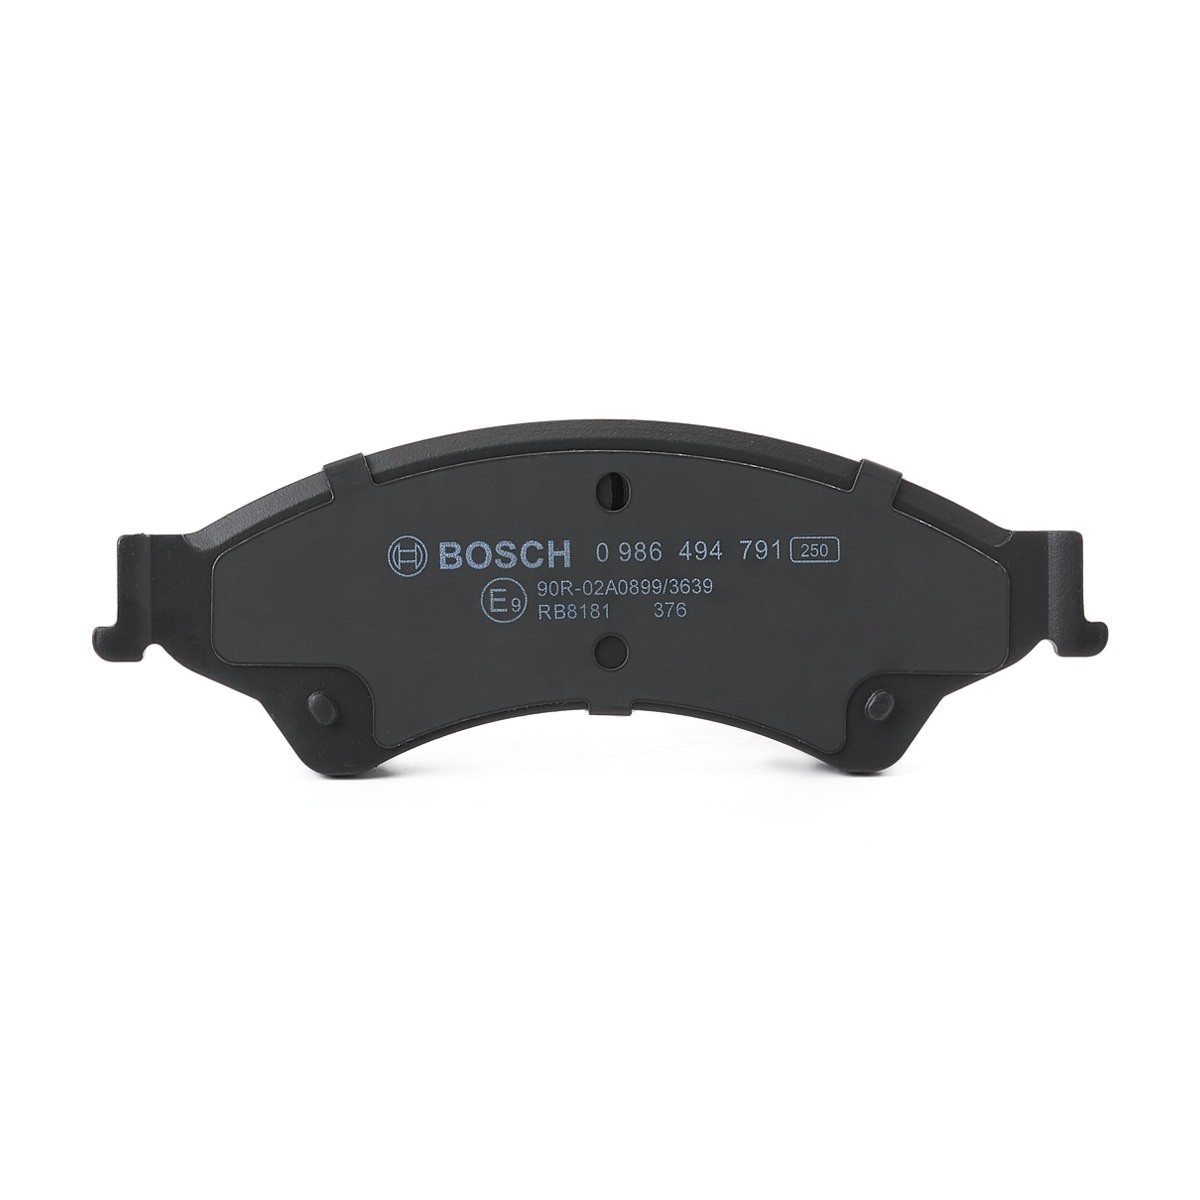 0986494791 Disc brake pads BOSCH E9 90R- 02A0904/3639 review and test